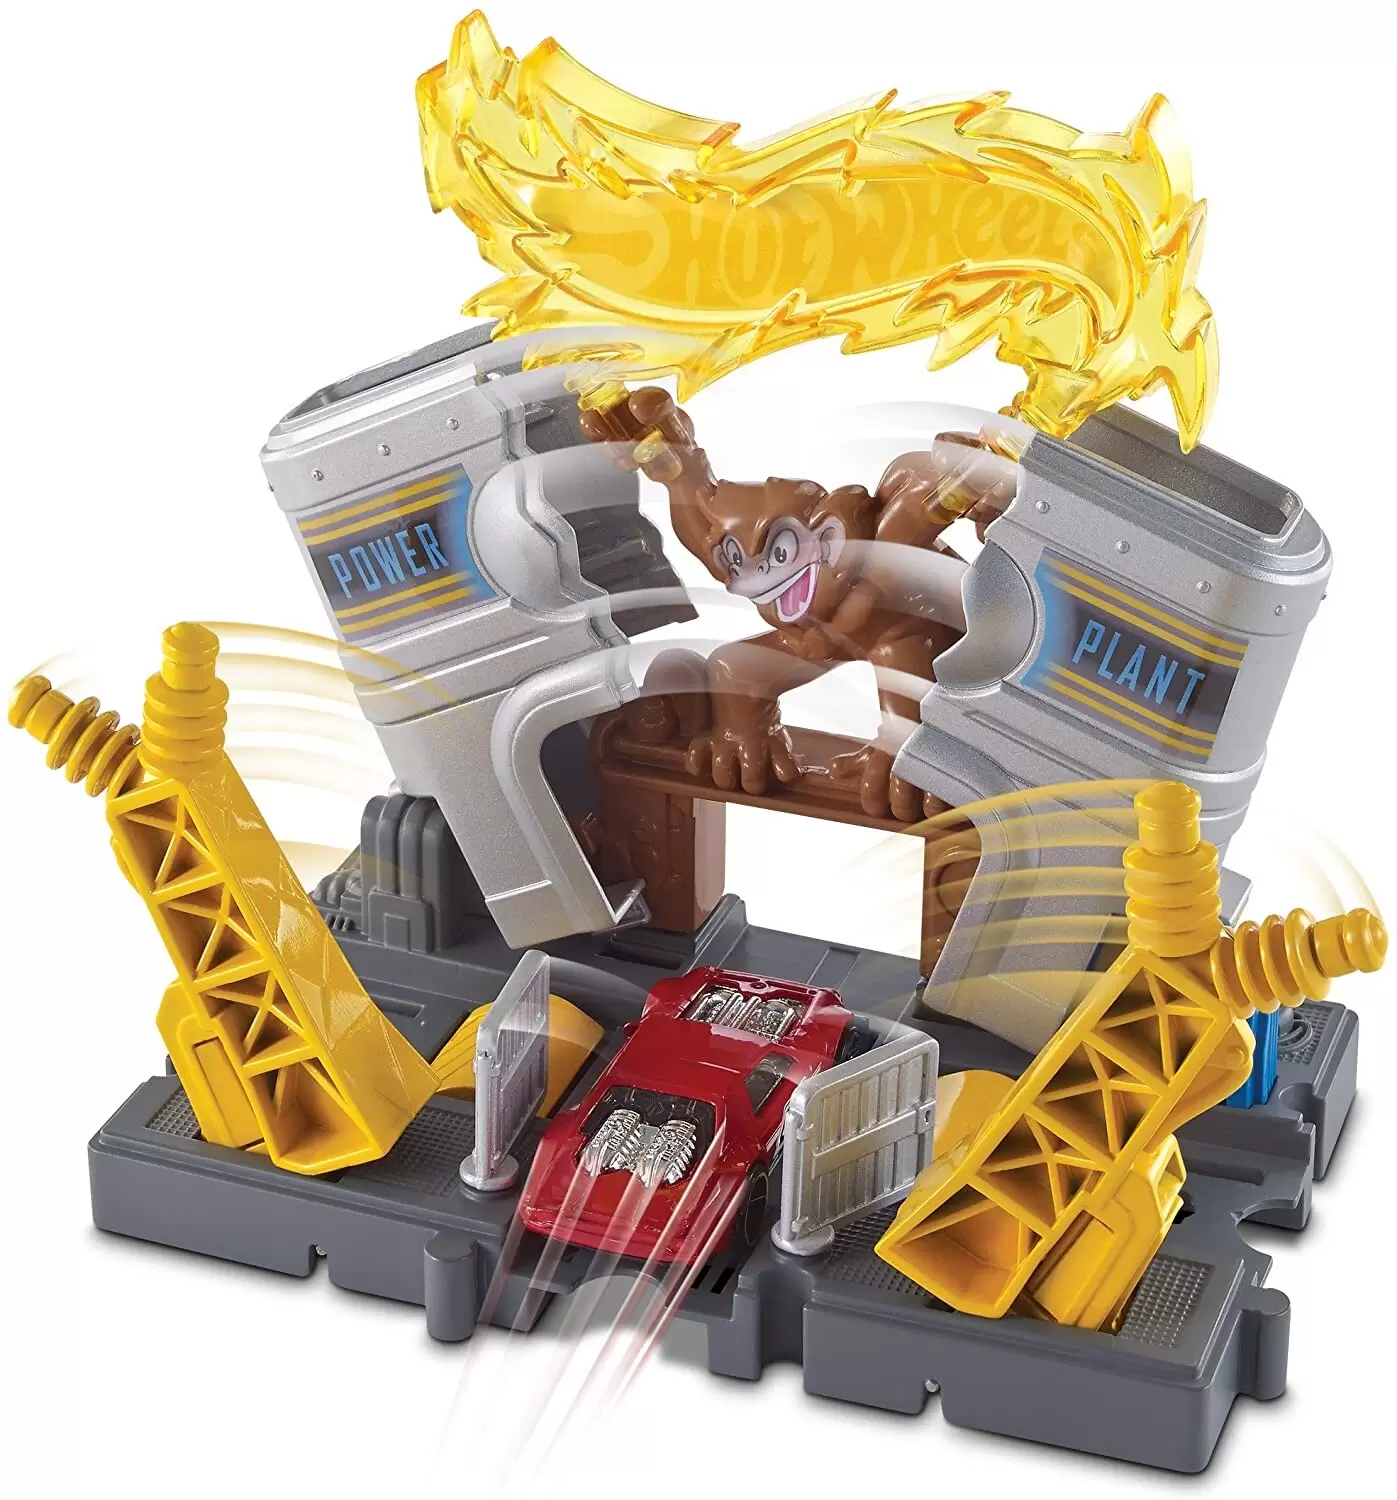 Hot Wheels - Playsets - Downtown Power Plant BLAST